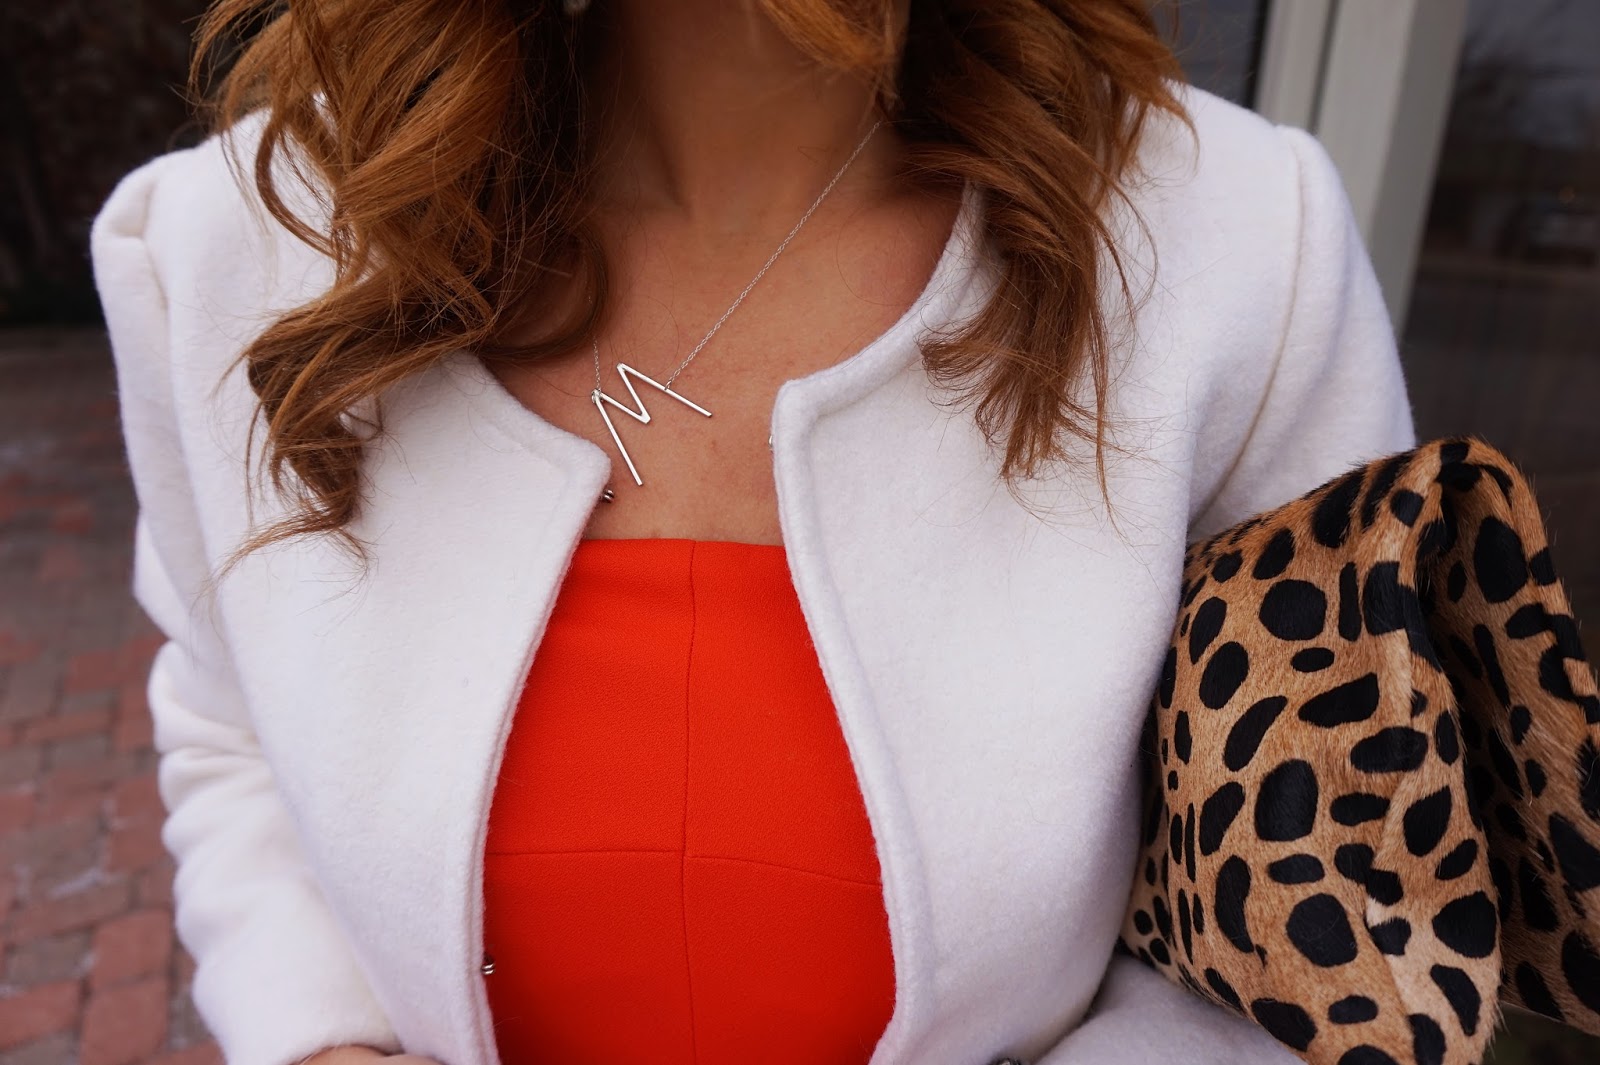 Red Dirt and Glitter: Valentine's Day // Jumpsuit and White Fur Coat